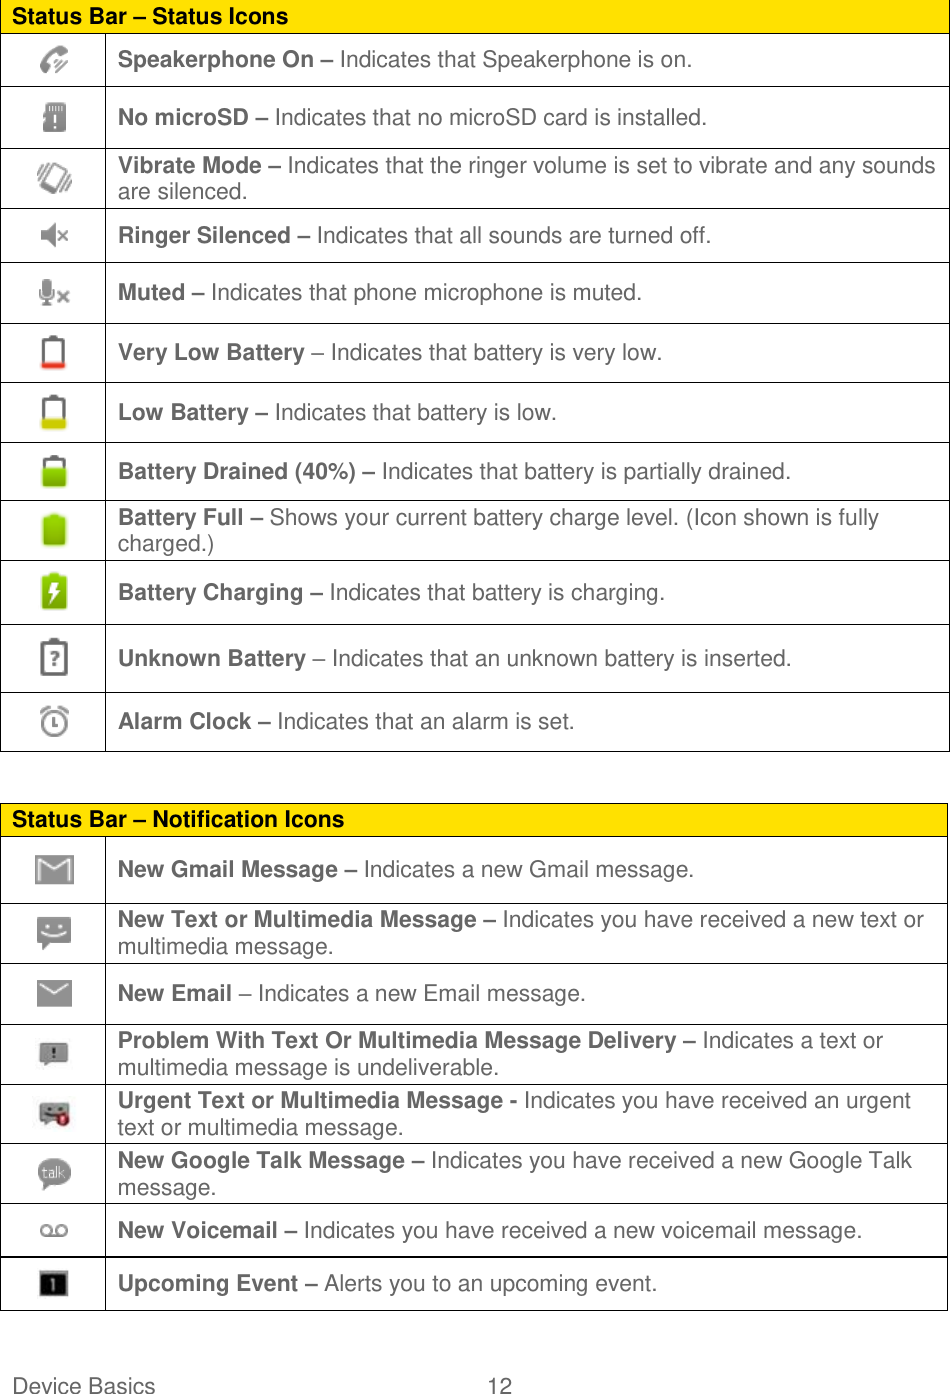 Device Basics  12 Status Bar – Status Icons  Speakerphone On – Indicates that Speakerphone is on.  No microSD – Indicates that no microSD card is installed.  Vibrate Mode – Indicates that the ringer volume is set to vibrate and any sounds are silenced.  Ringer Silenced – Indicates that all sounds are turned off.  Muted – Indicates that phone microphone is muted.  Very Low Battery – Indicates that battery is very low.  Low Battery – Indicates that battery is low.  Battery Drained (40%) – Indicates that battery is partially drained.  Battery Full – Shows your current battery charge level. (Icon shown is fully charged.)  Battery Charging – Indicates that battery is charging.  Unknown Battery – Indicates that an unknown battery is inserted.  Alarm Clock – Indicates that an alarm is set.  Status Bar – Notification Icons  New Gmail Message – Indicates a new Gmail message.  New Text or Multimedia Message – Indicates you have received a new text or multimedia message.  New Email – Indicates a new Email message.  Problem With Text Or Multimedia Message Delivery – Indicates a text or multimedia message is undeliverable.  Urgent Text or Multimedia Message - Indicates you have received an urgent text or multimedia message.  New Google Talk Message – Indicates you have received a new Google Talk message.  New Voicemail – Indicates you have received a new voicemail message.  Upcoming Event – Alerts you to an upcoming event. 